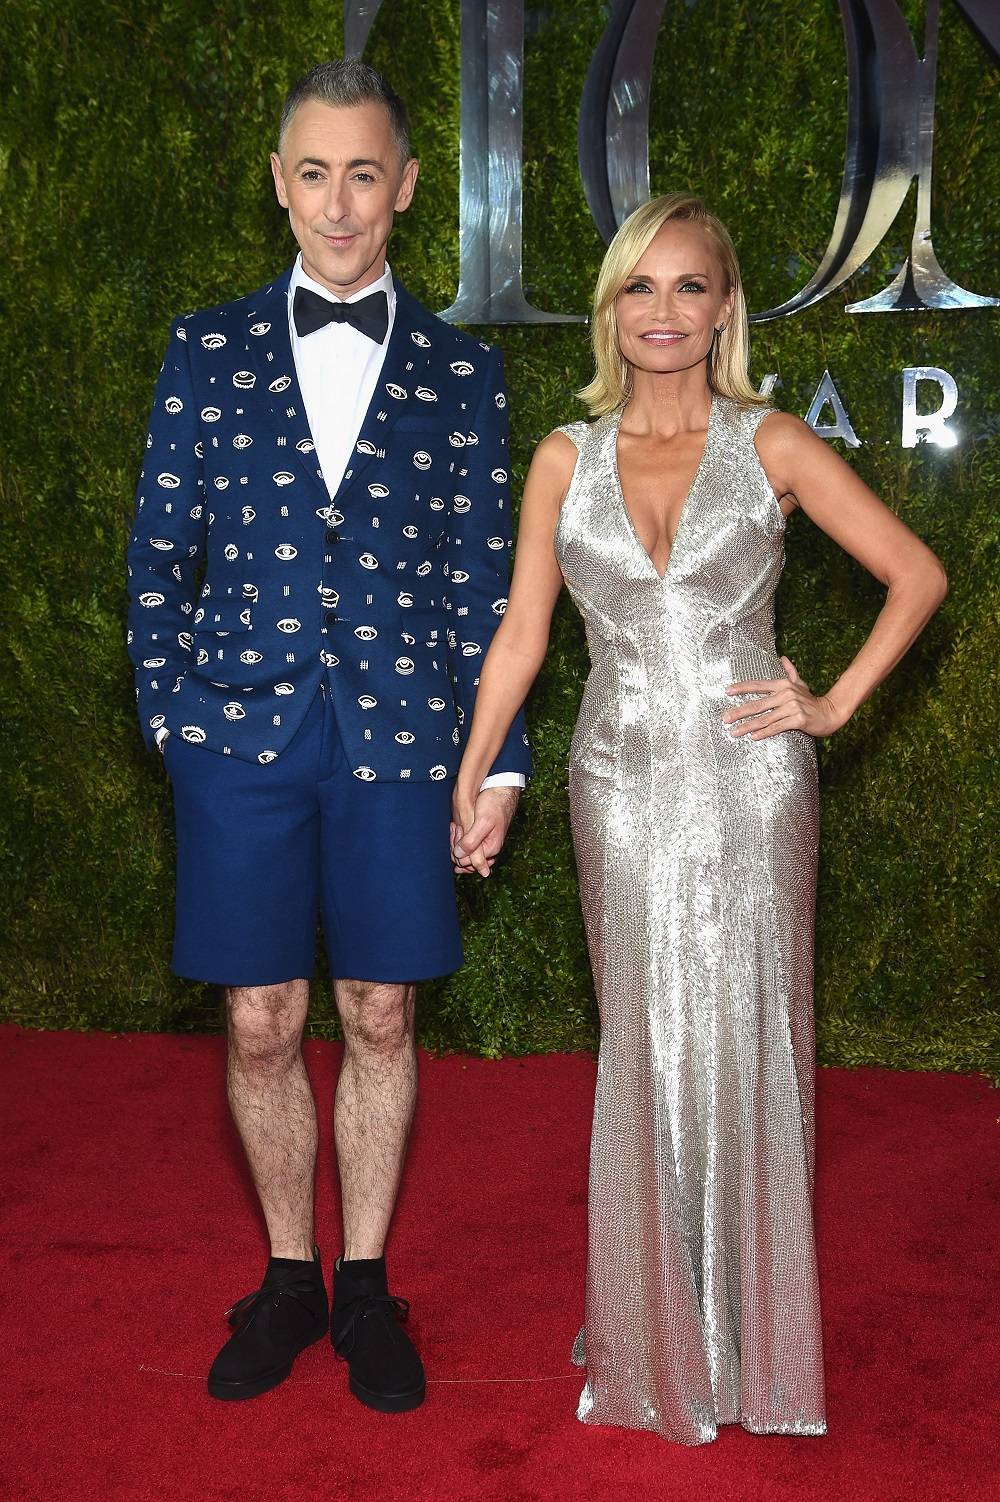 NEW YORK, NY - JUNE 07:  Hosts Alan Cumming (L) and Kristin Chenoweth attends the 2015 Tony Awards  at Radio City Music Hall on June 7, 2015 in New York City.  (Photo by Dimitrios Kambouris/Getty Images for Tony Awards Productions)